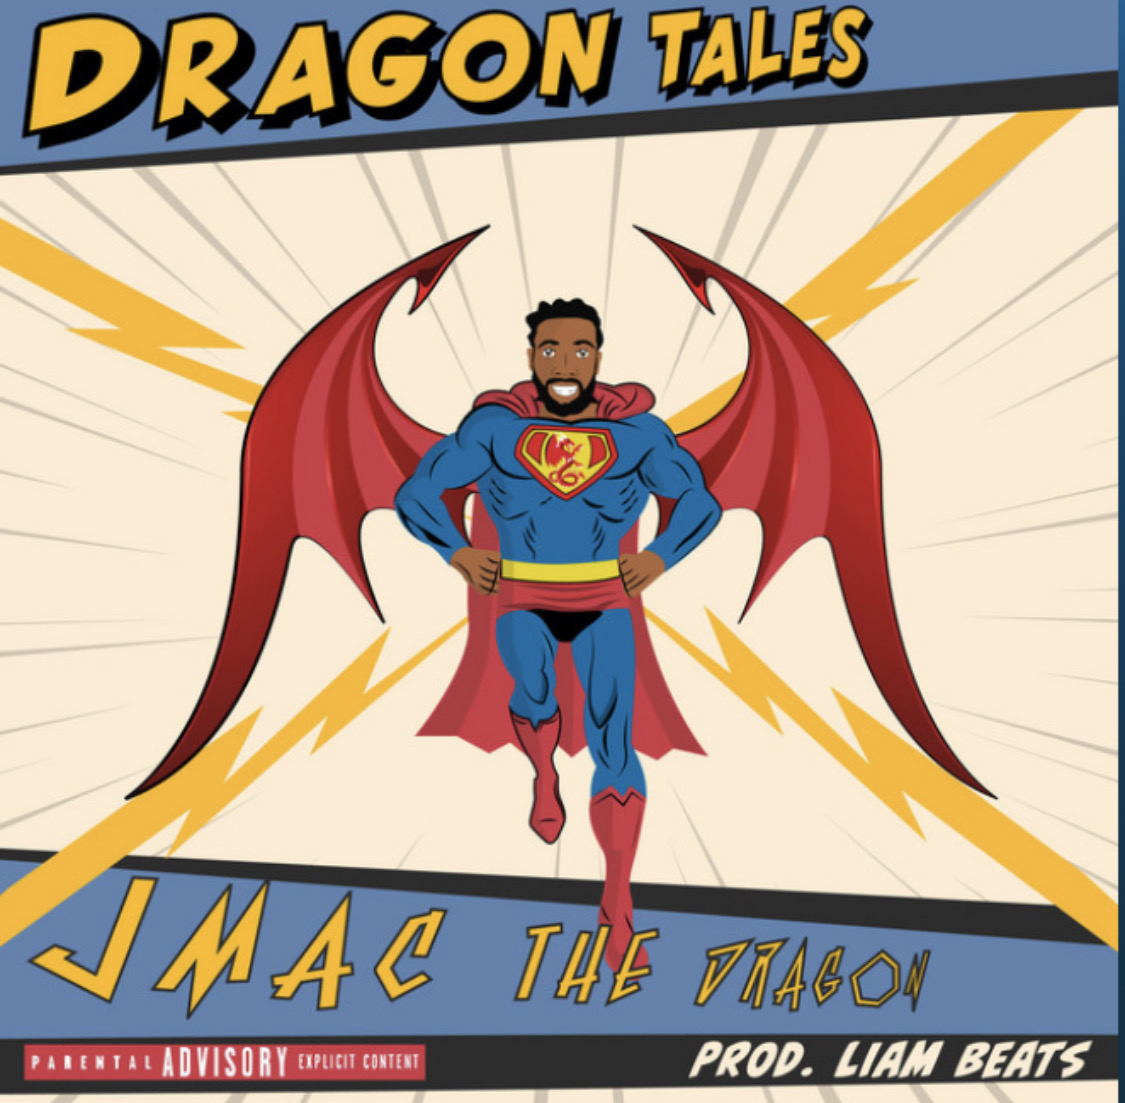 Cover art features a digital drawing of Jordan McFeders (AKA JMAC The Dragon) in a superhero suit that is reminiscent of Superman. Two crimson, dragon-like wings behind McFeders alludes to his intended “Dragon Persona.” Four bolts of lightning are visible as the emerge from behind McFeders. “DRAGON TALES” can be read in the top left corner of the cover. “JMAC THE DRAGON” can be read emerging from the bottom left corner. In the bottom right corner, “PROD. LIAM BEATS” can be seen.